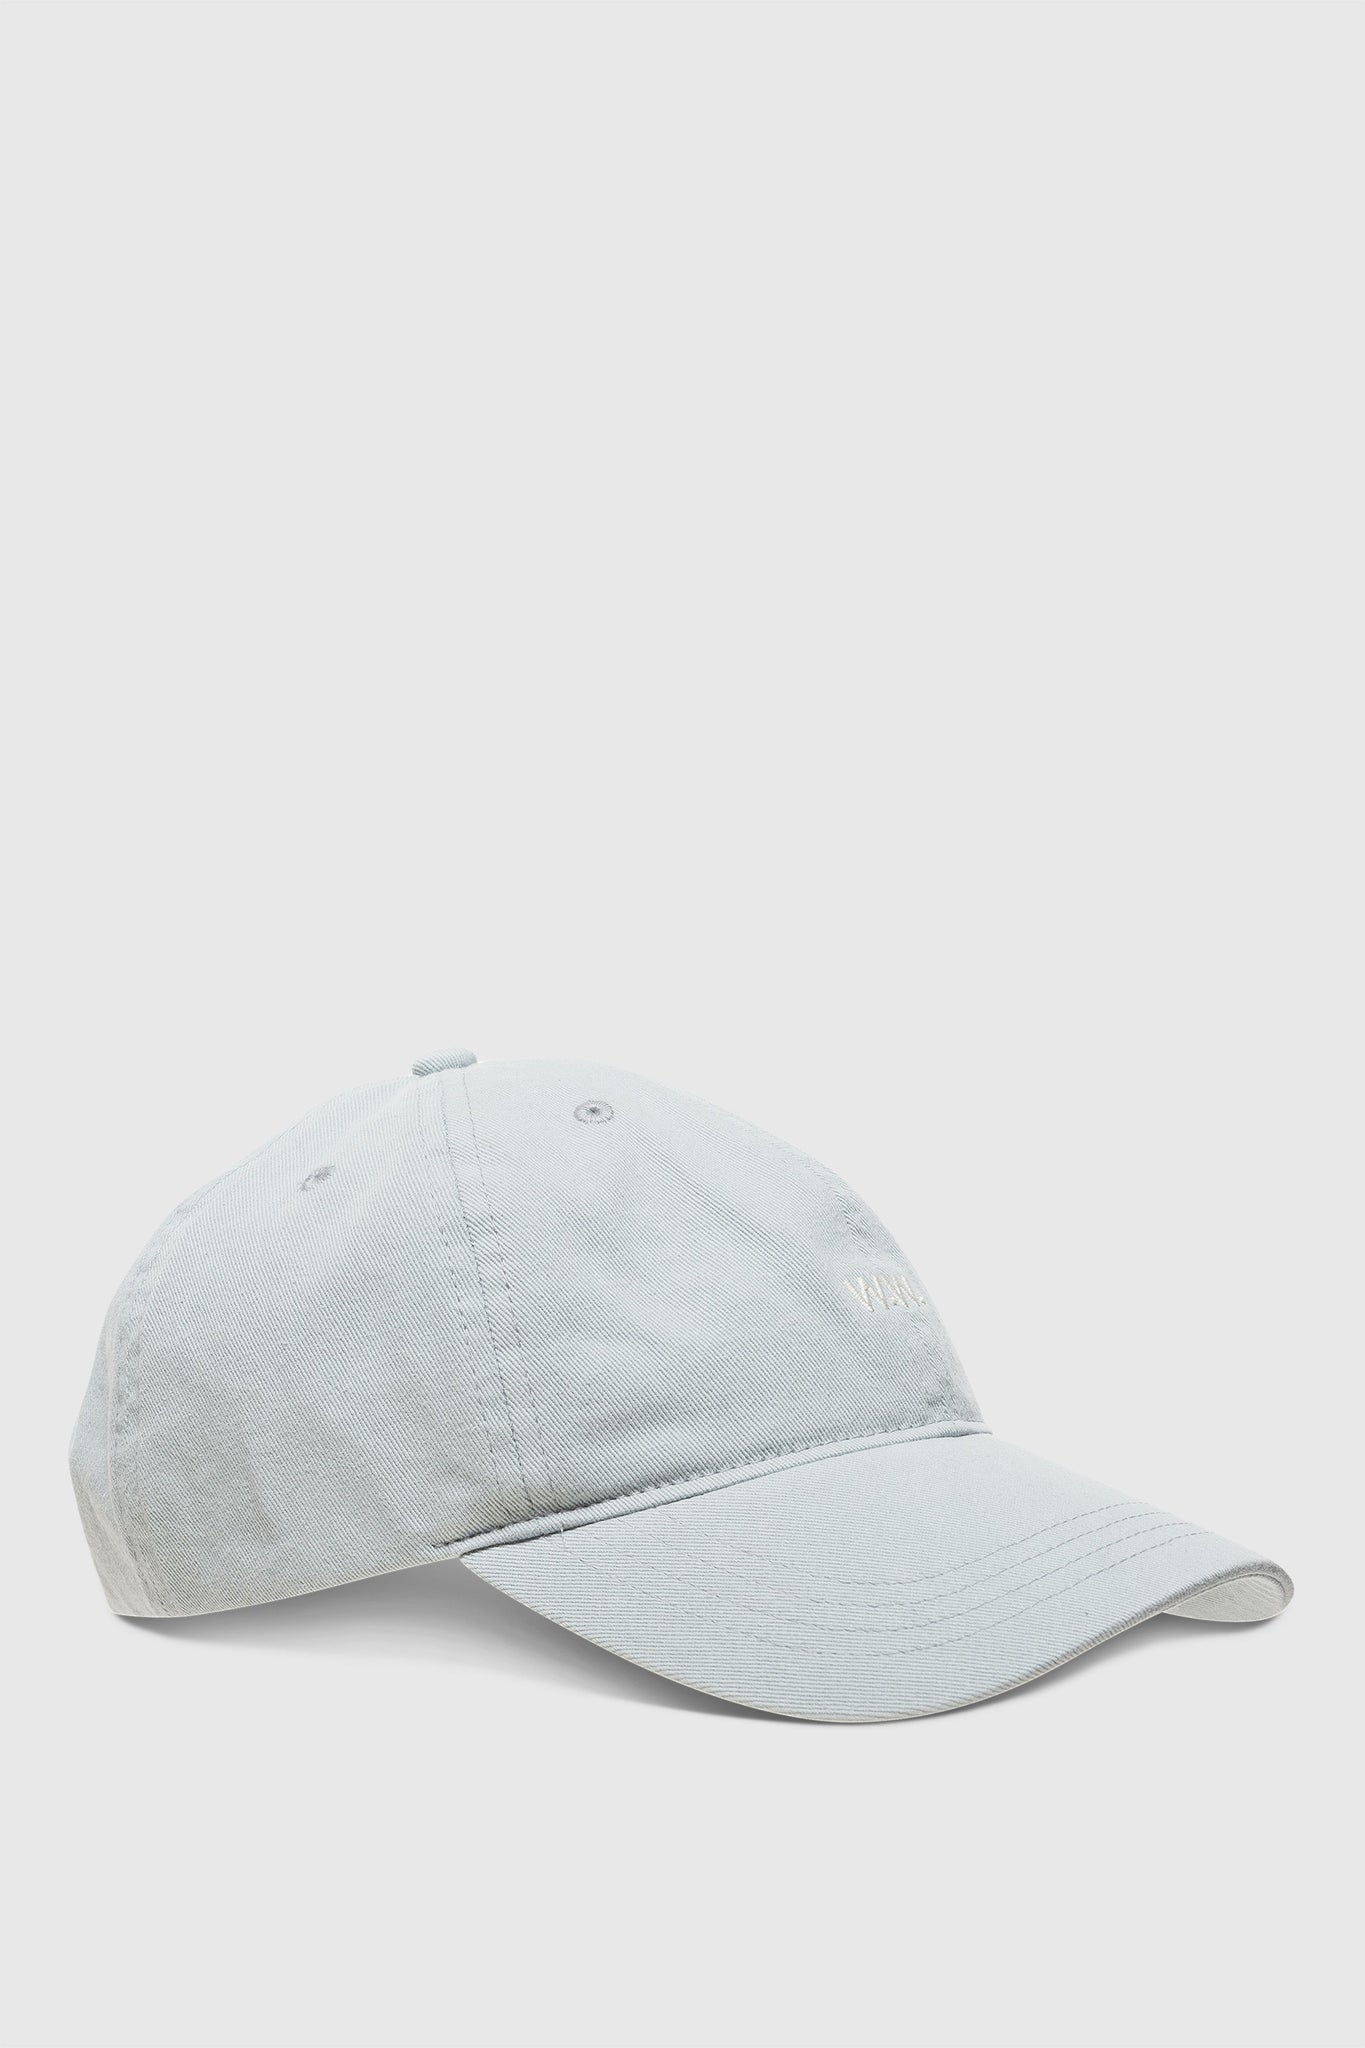 LOW PROFILE CAP IN LIGHT BLUE BY WOOD WOOD